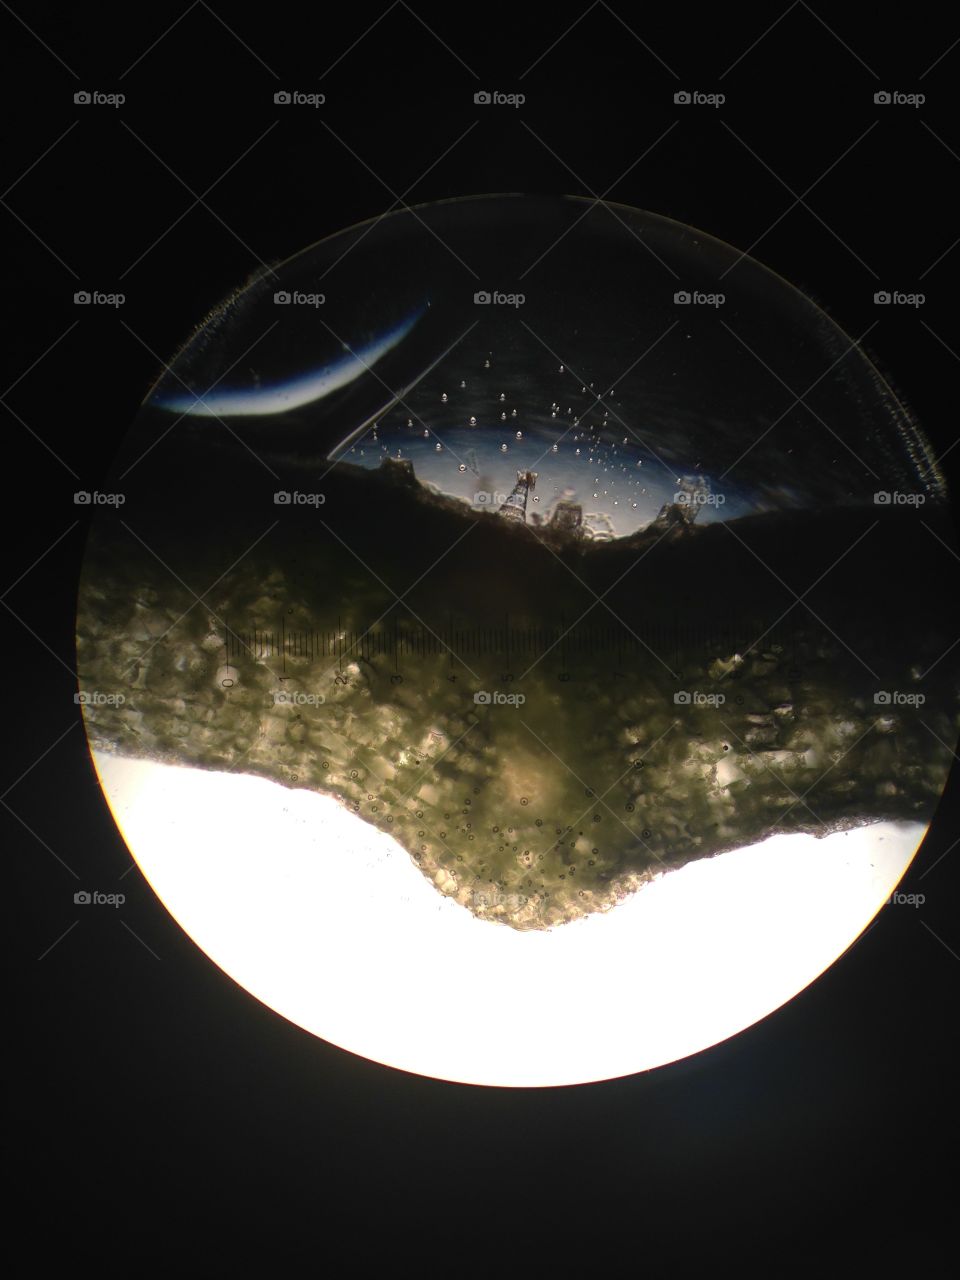 Cross section of a leaf at 100x or city skyline at night?